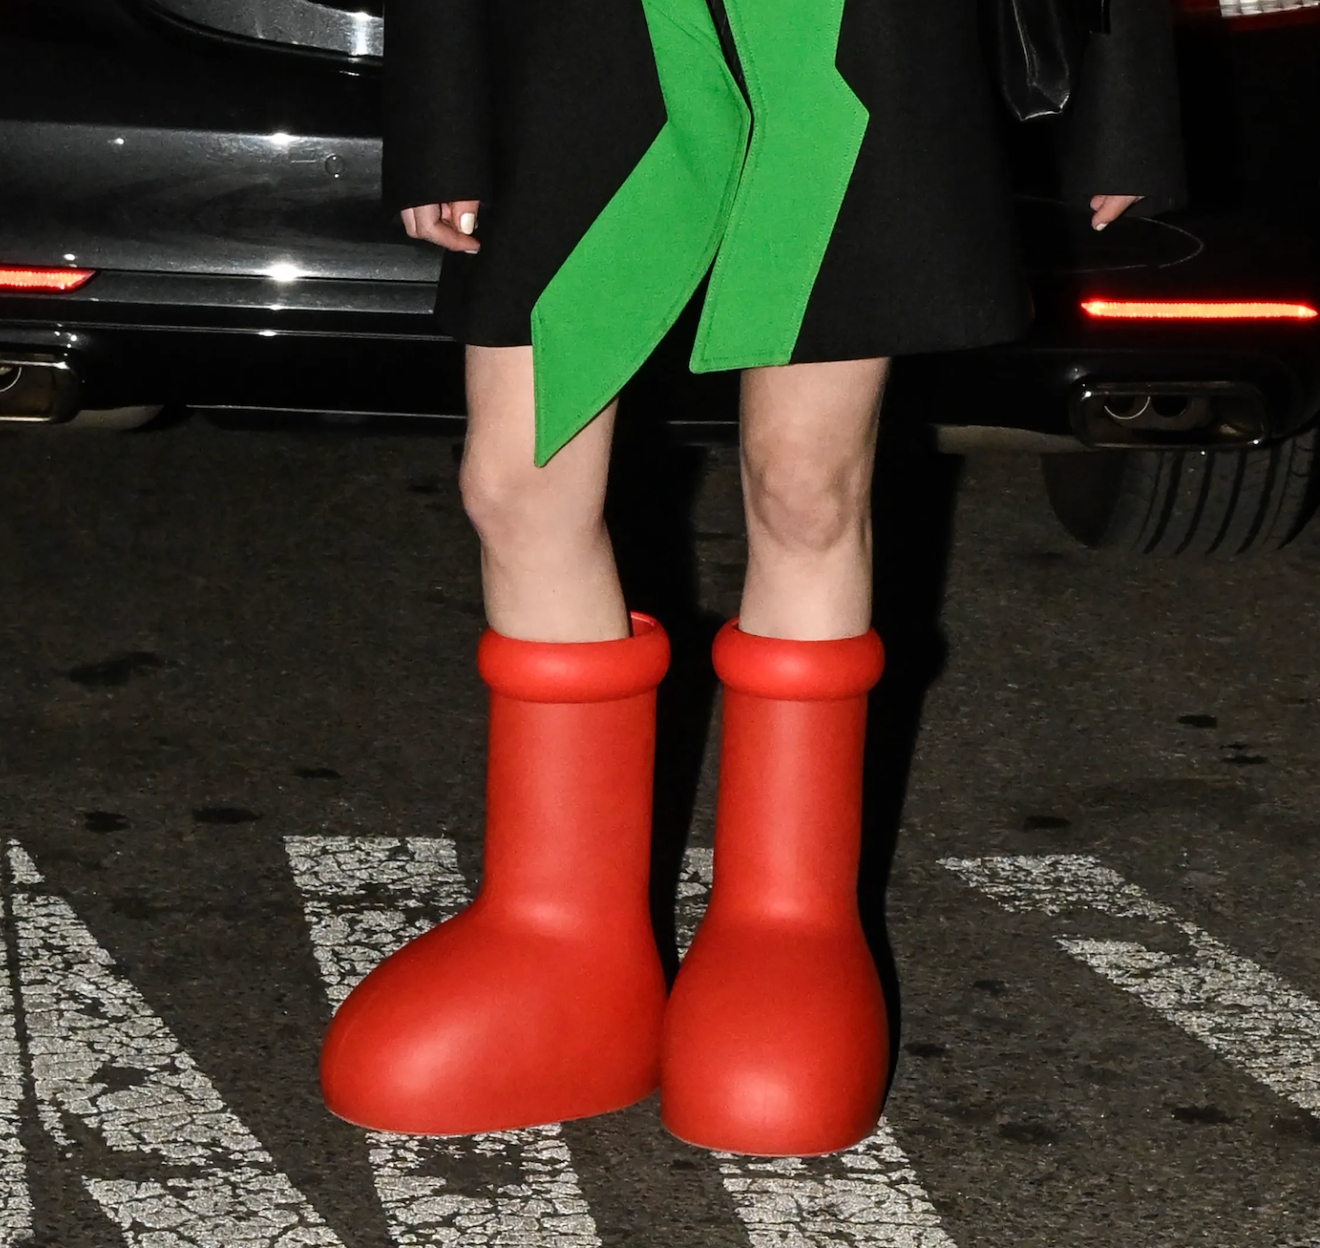 Gimmicks like MSCHF’s big red boots are designed to gain traction on social media. Photo: Fashionista